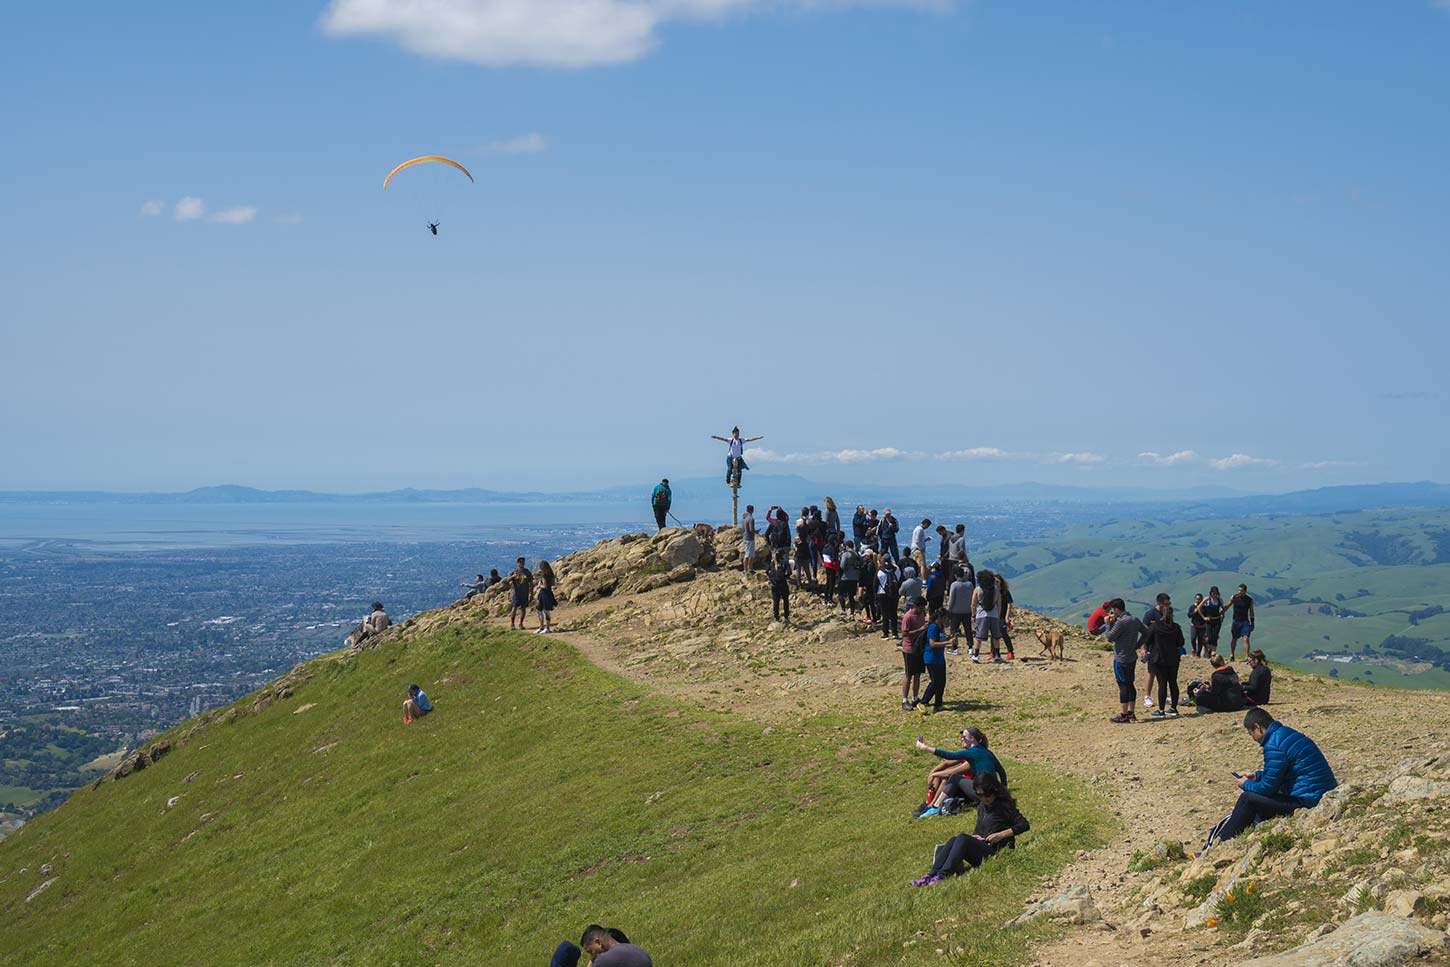 Line of hikers waiting to take pictures on Mission Peak